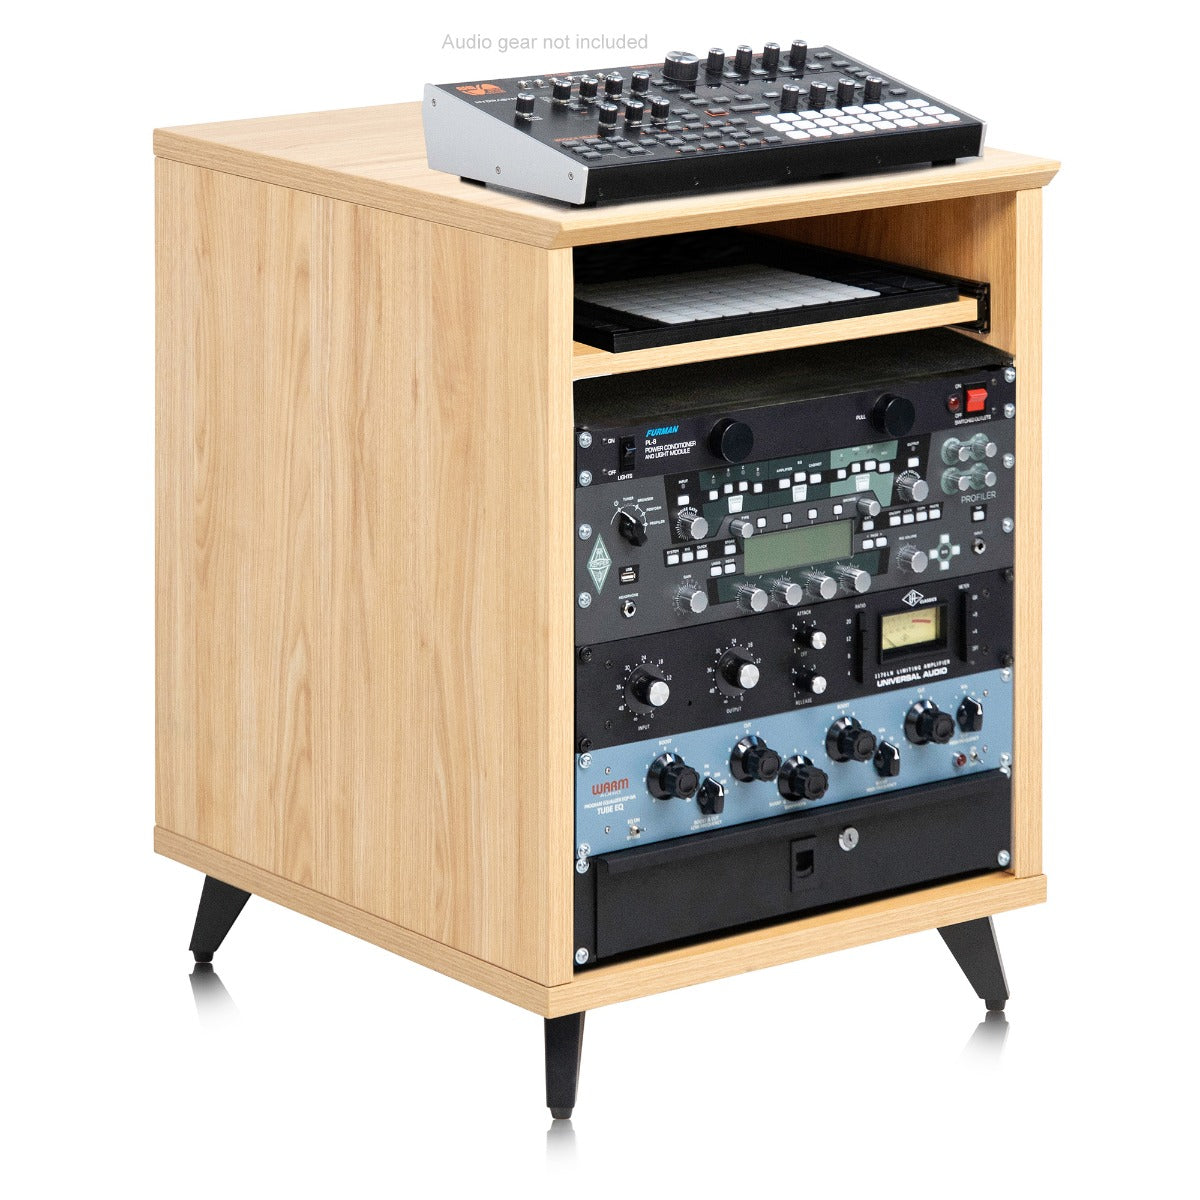 Right angled image of the Gator Frameworks Elite Series Furniture Desk 10U Rack - Maple with audio gear installed